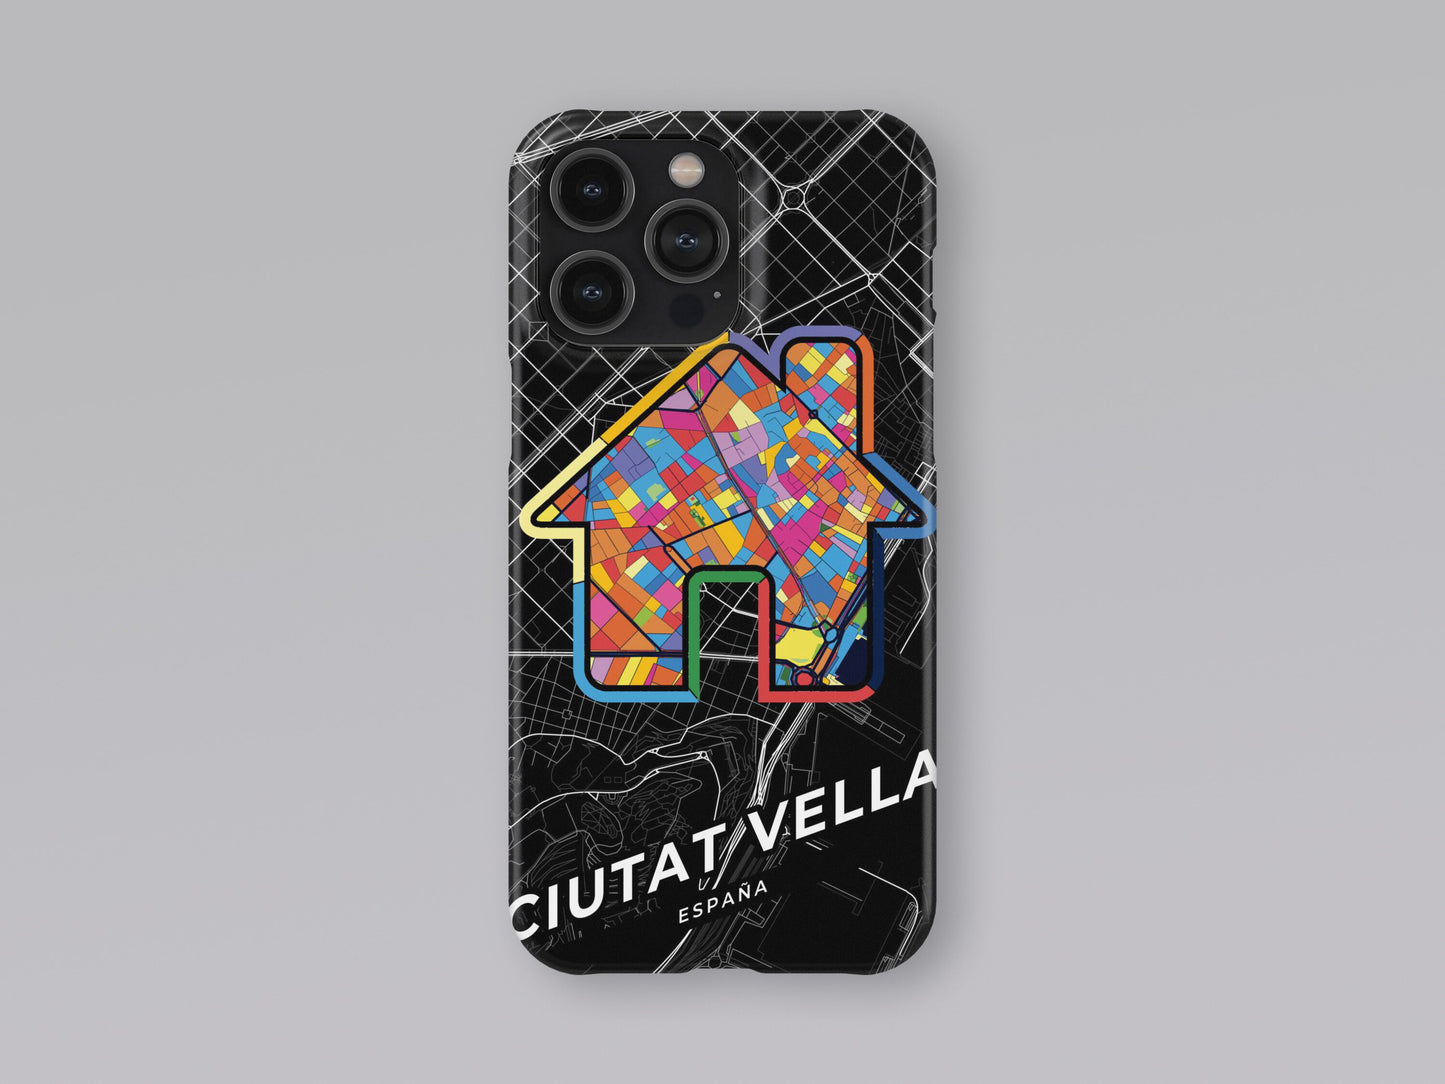 Ciutat Vella Spain slim phone case with colorful icon. Birthday, wedding or housewarming gift. Couple match cases. 3